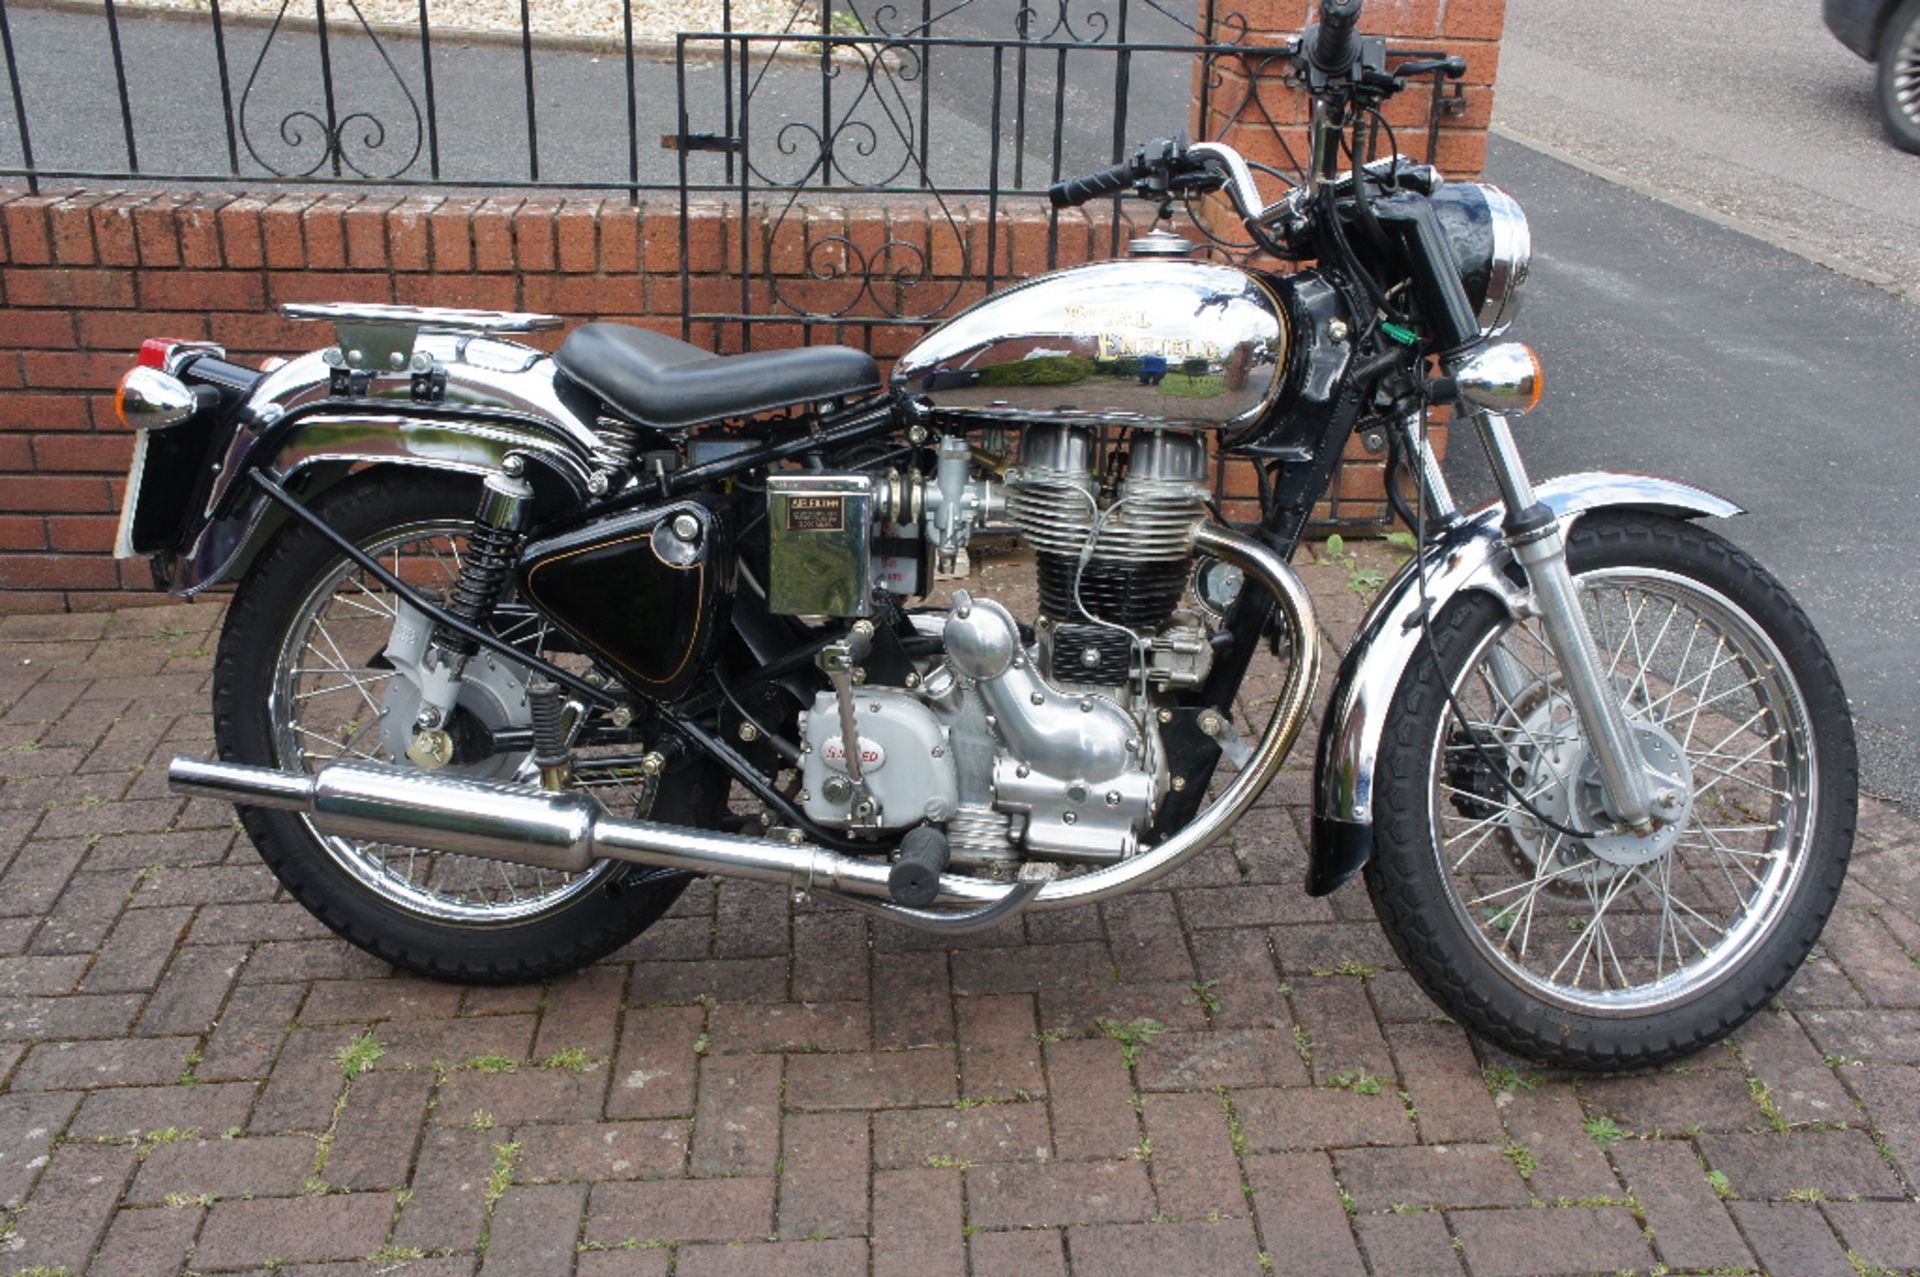 A 2009 Royal Enfield Bullet 350, registration number WA58 NMZ, chrome and black. - Image 3 of 4